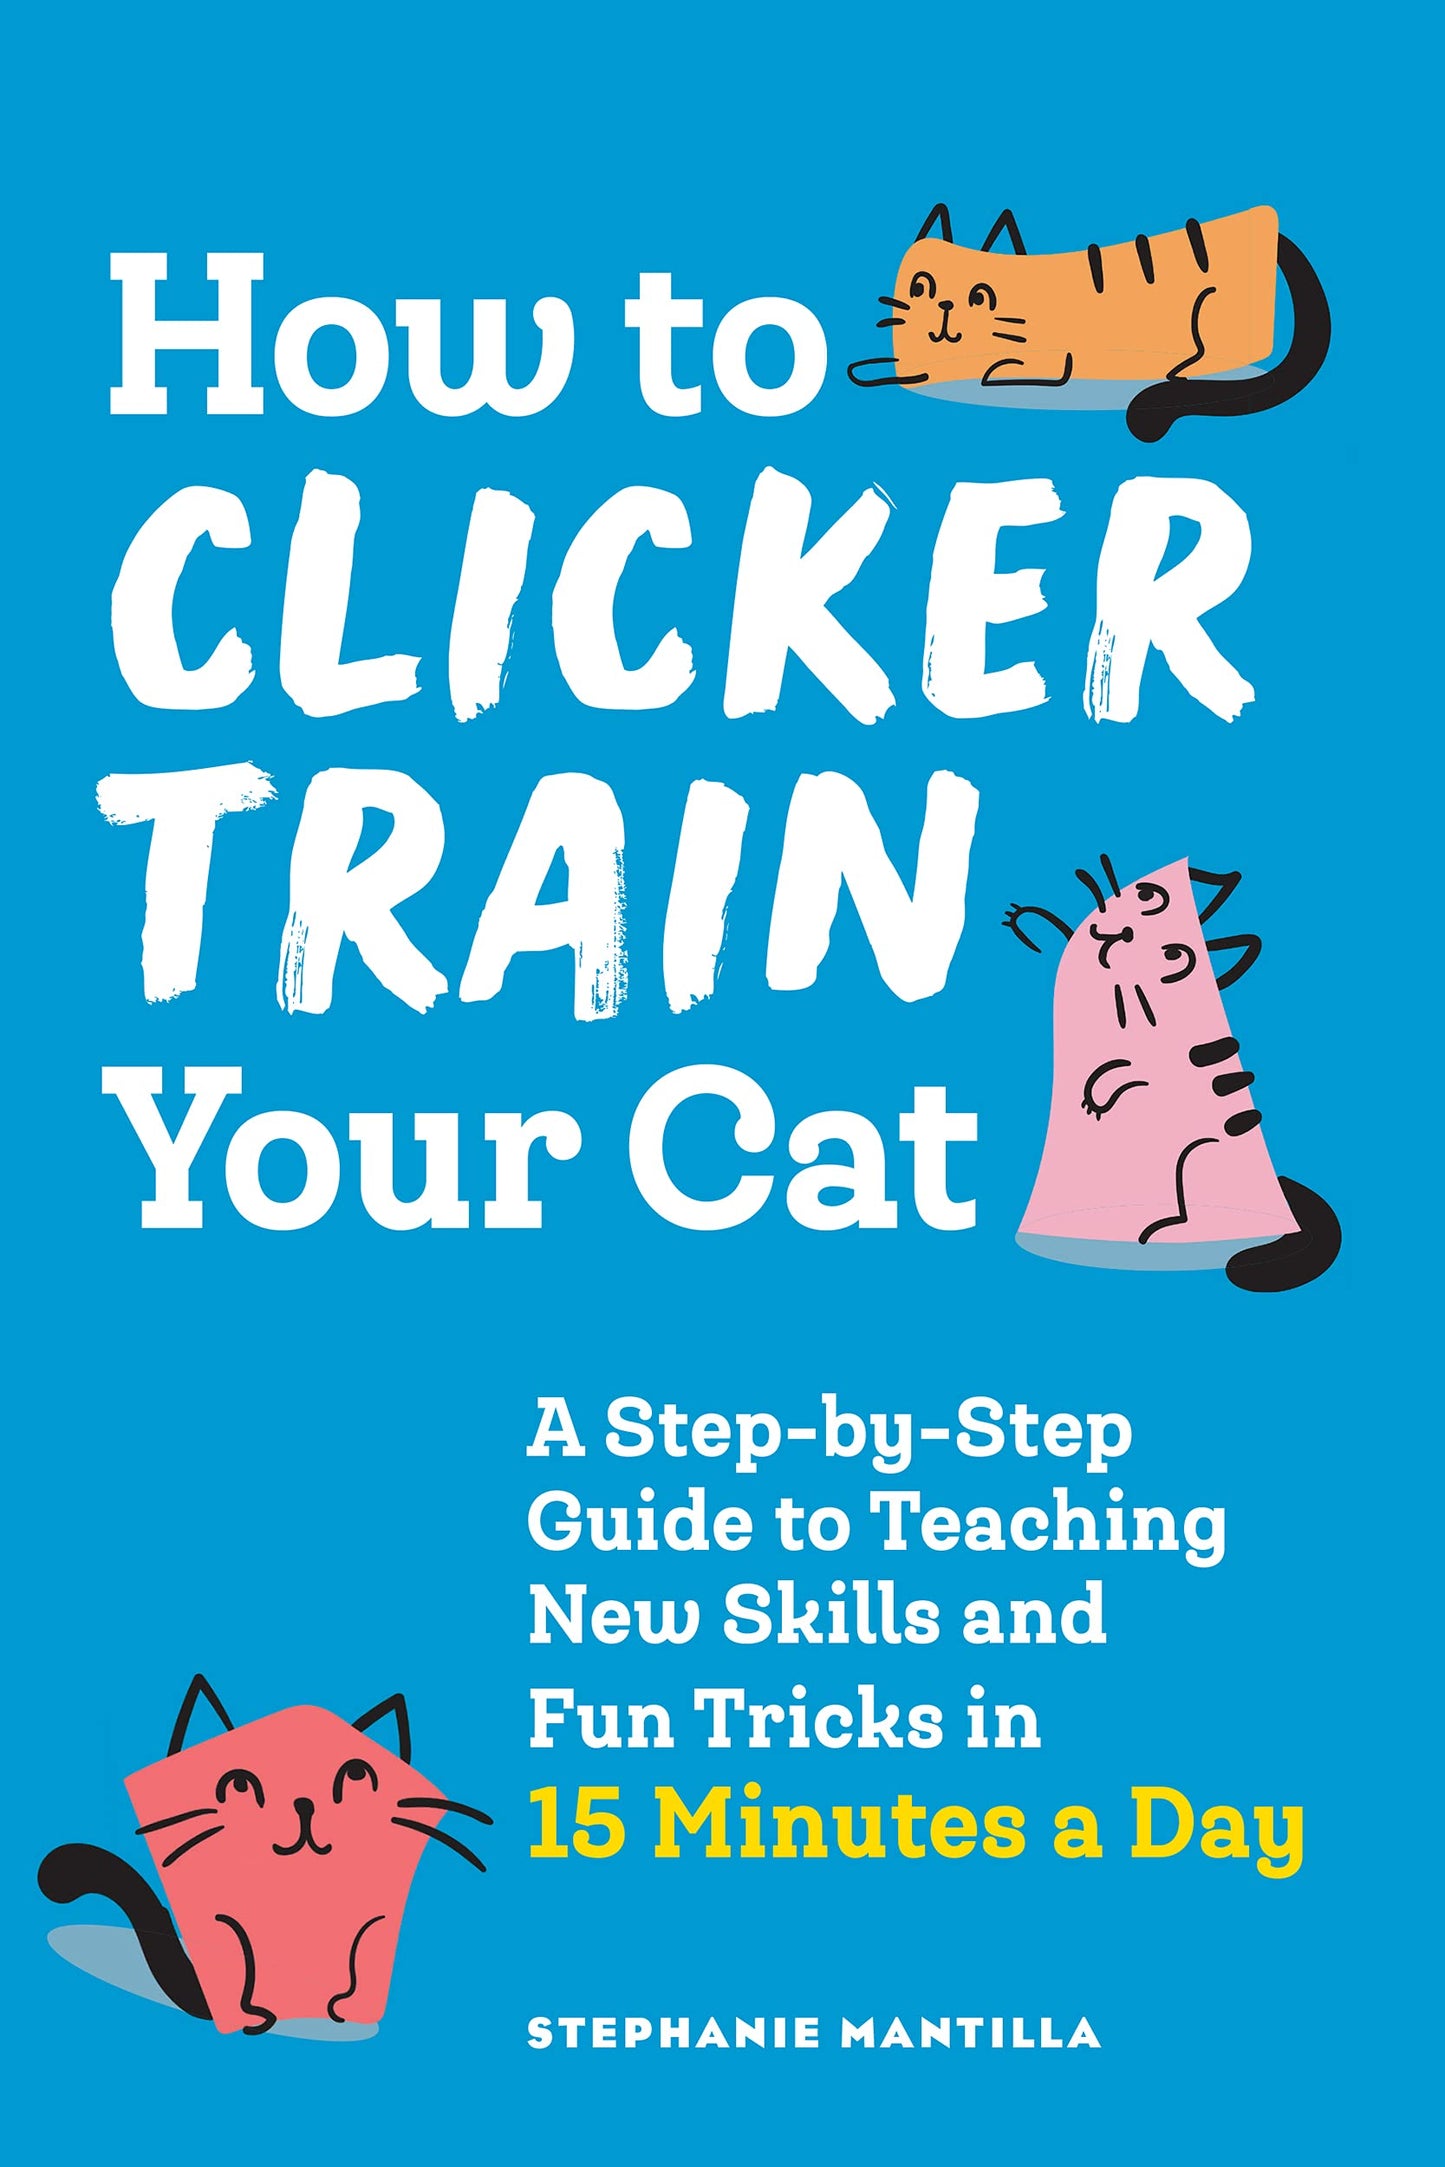 How To Clicker Train Your Cat by Stephanie Mantilla